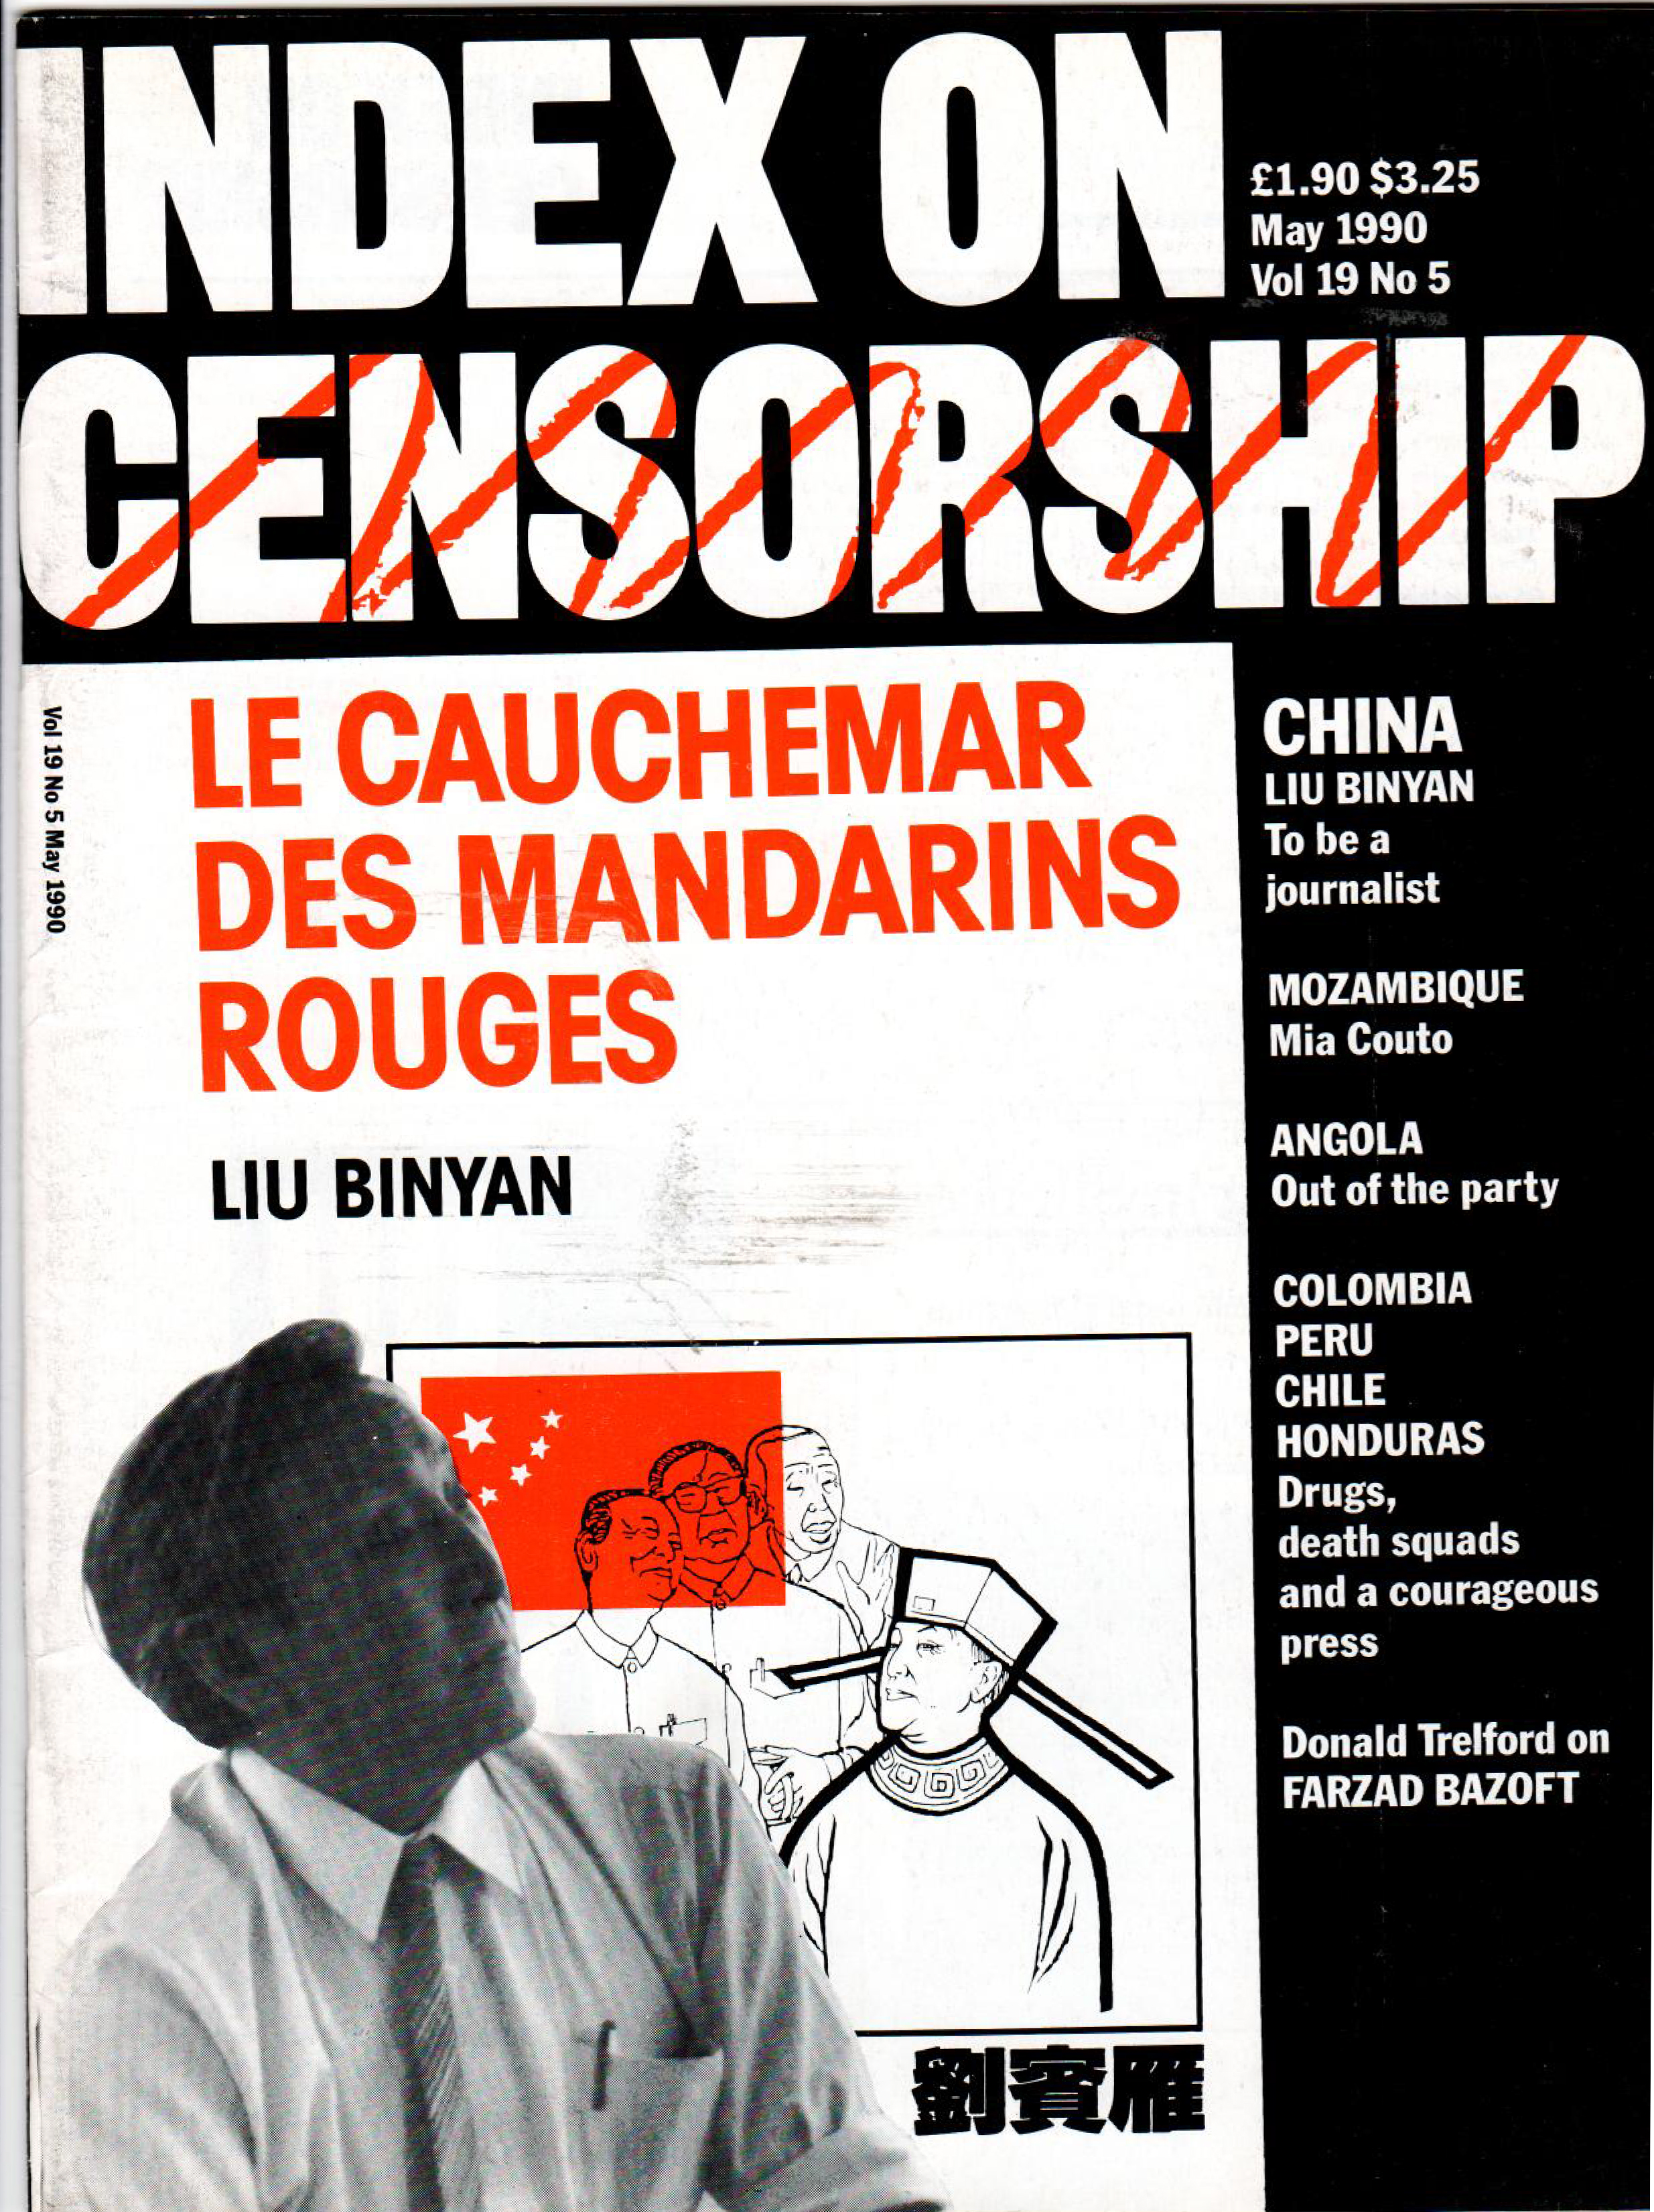 China: To be a journalist, the May 1990 issue of Index on Censorship magazine.